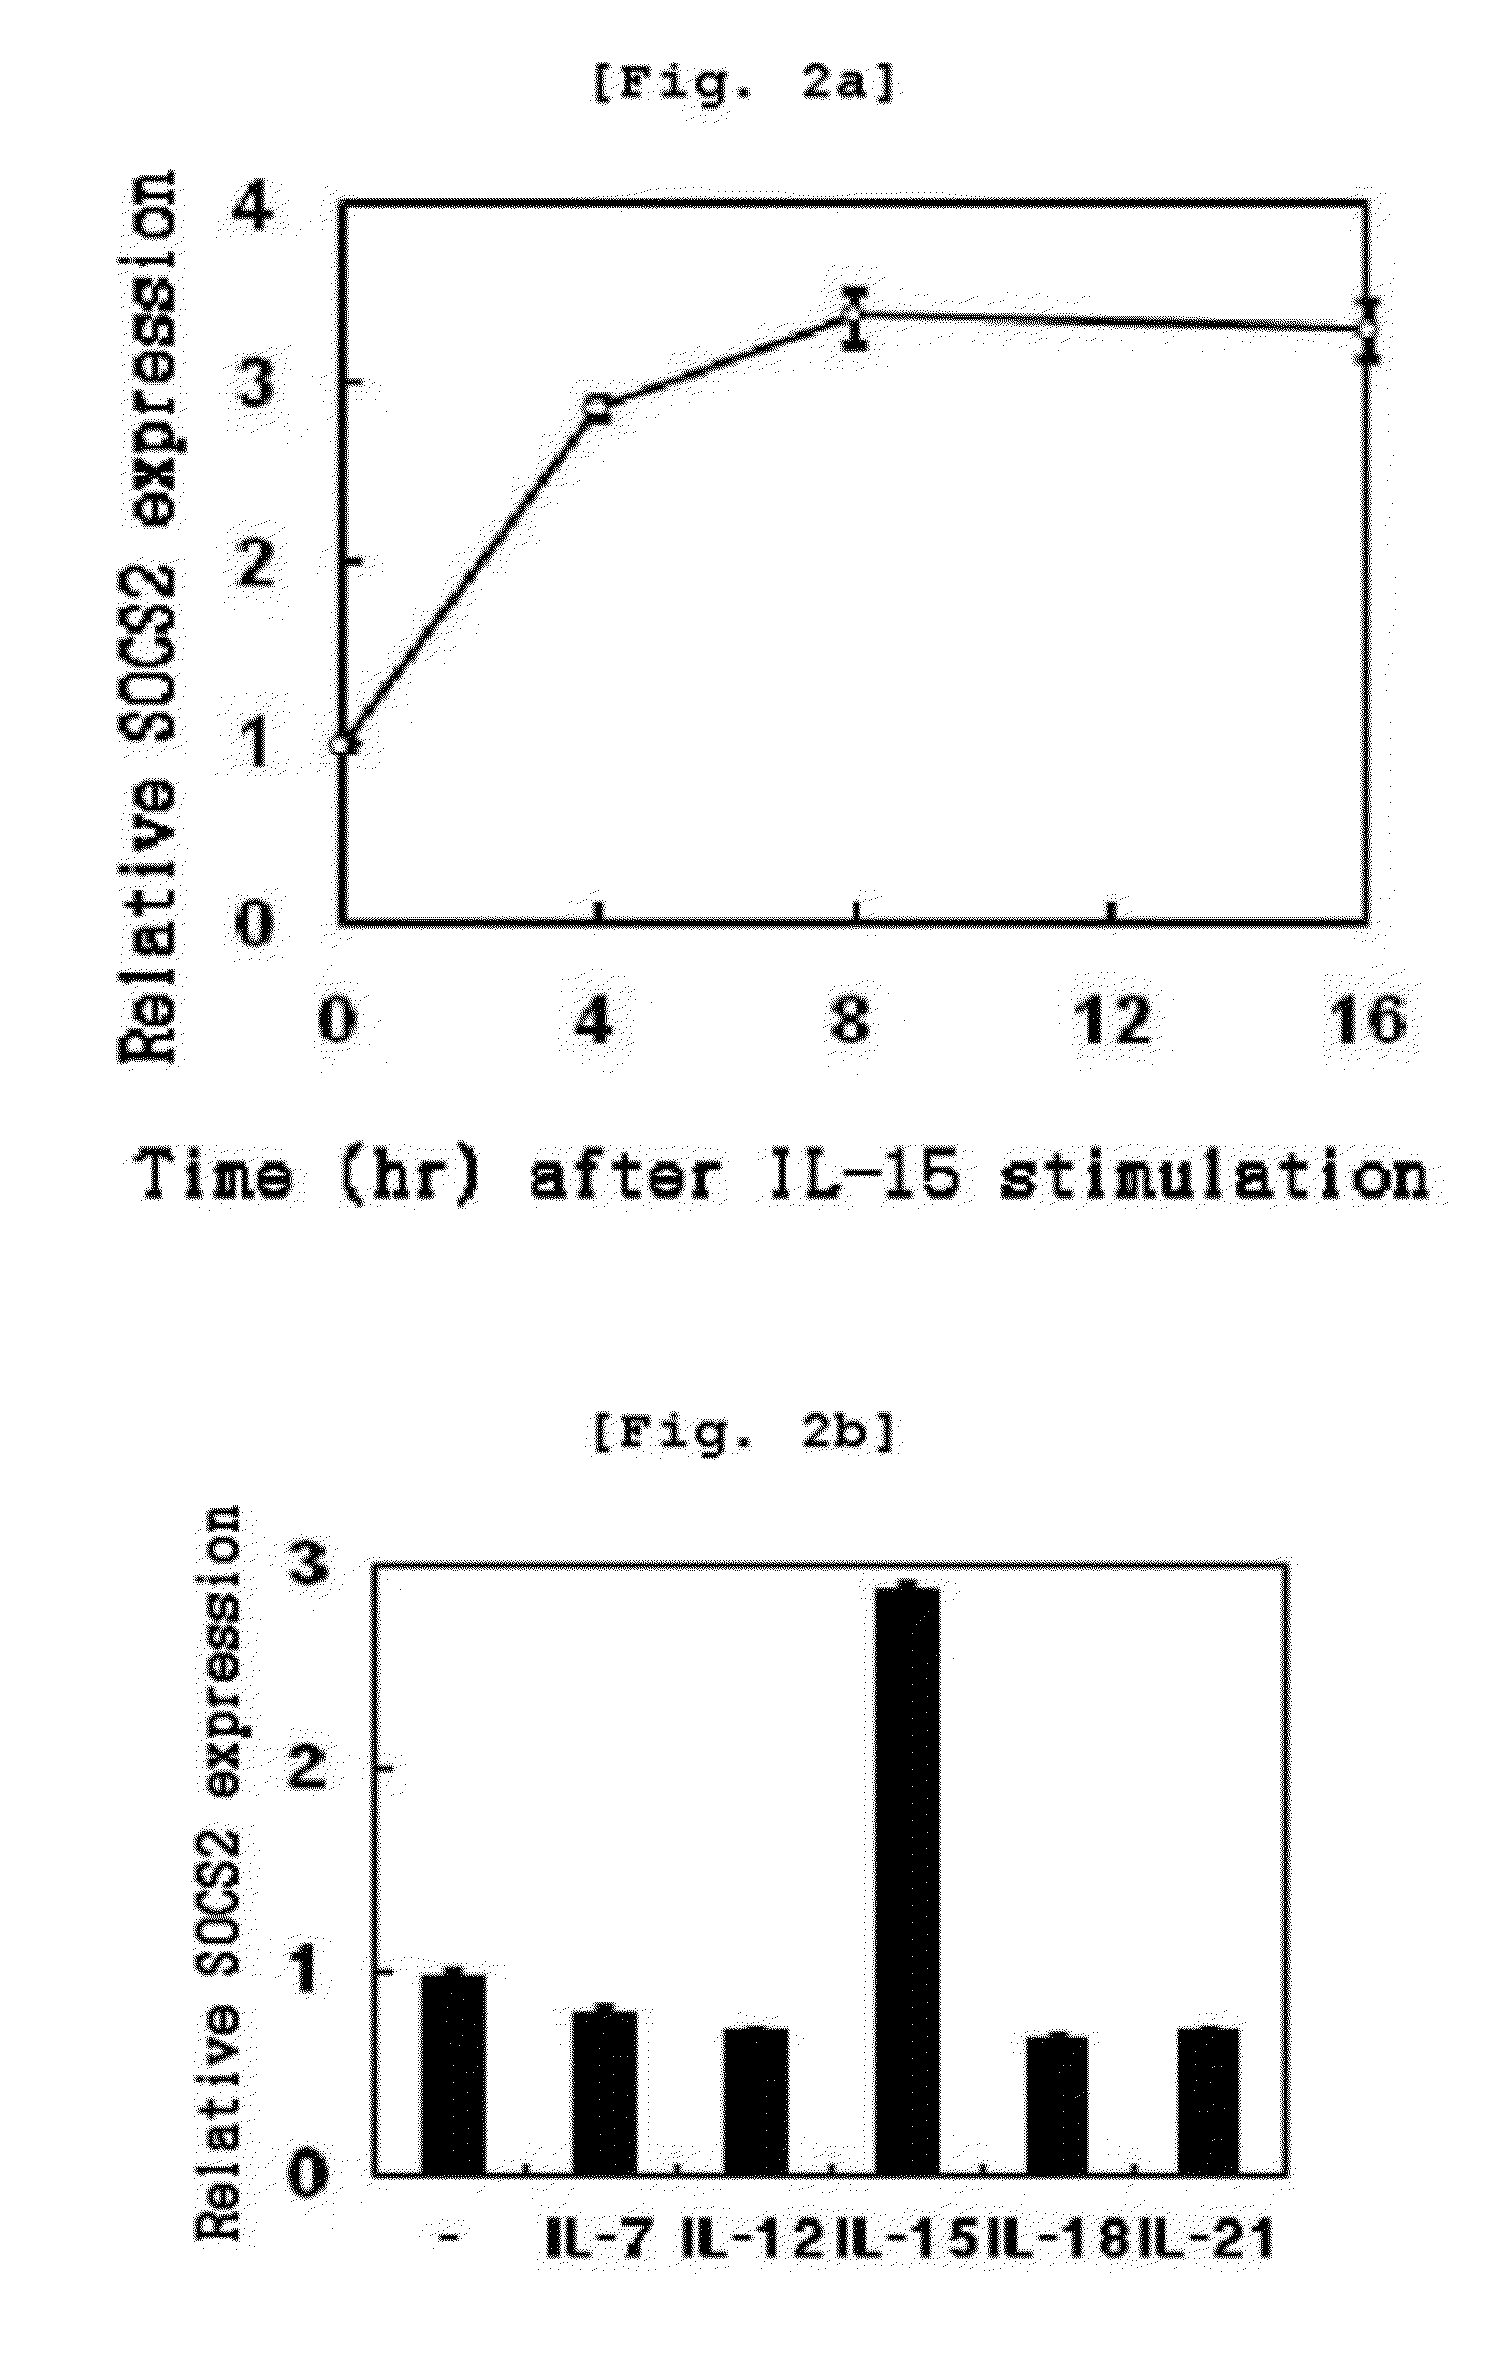 Method for activating a natural killer cell by adjusting the expression of the socs2 gene